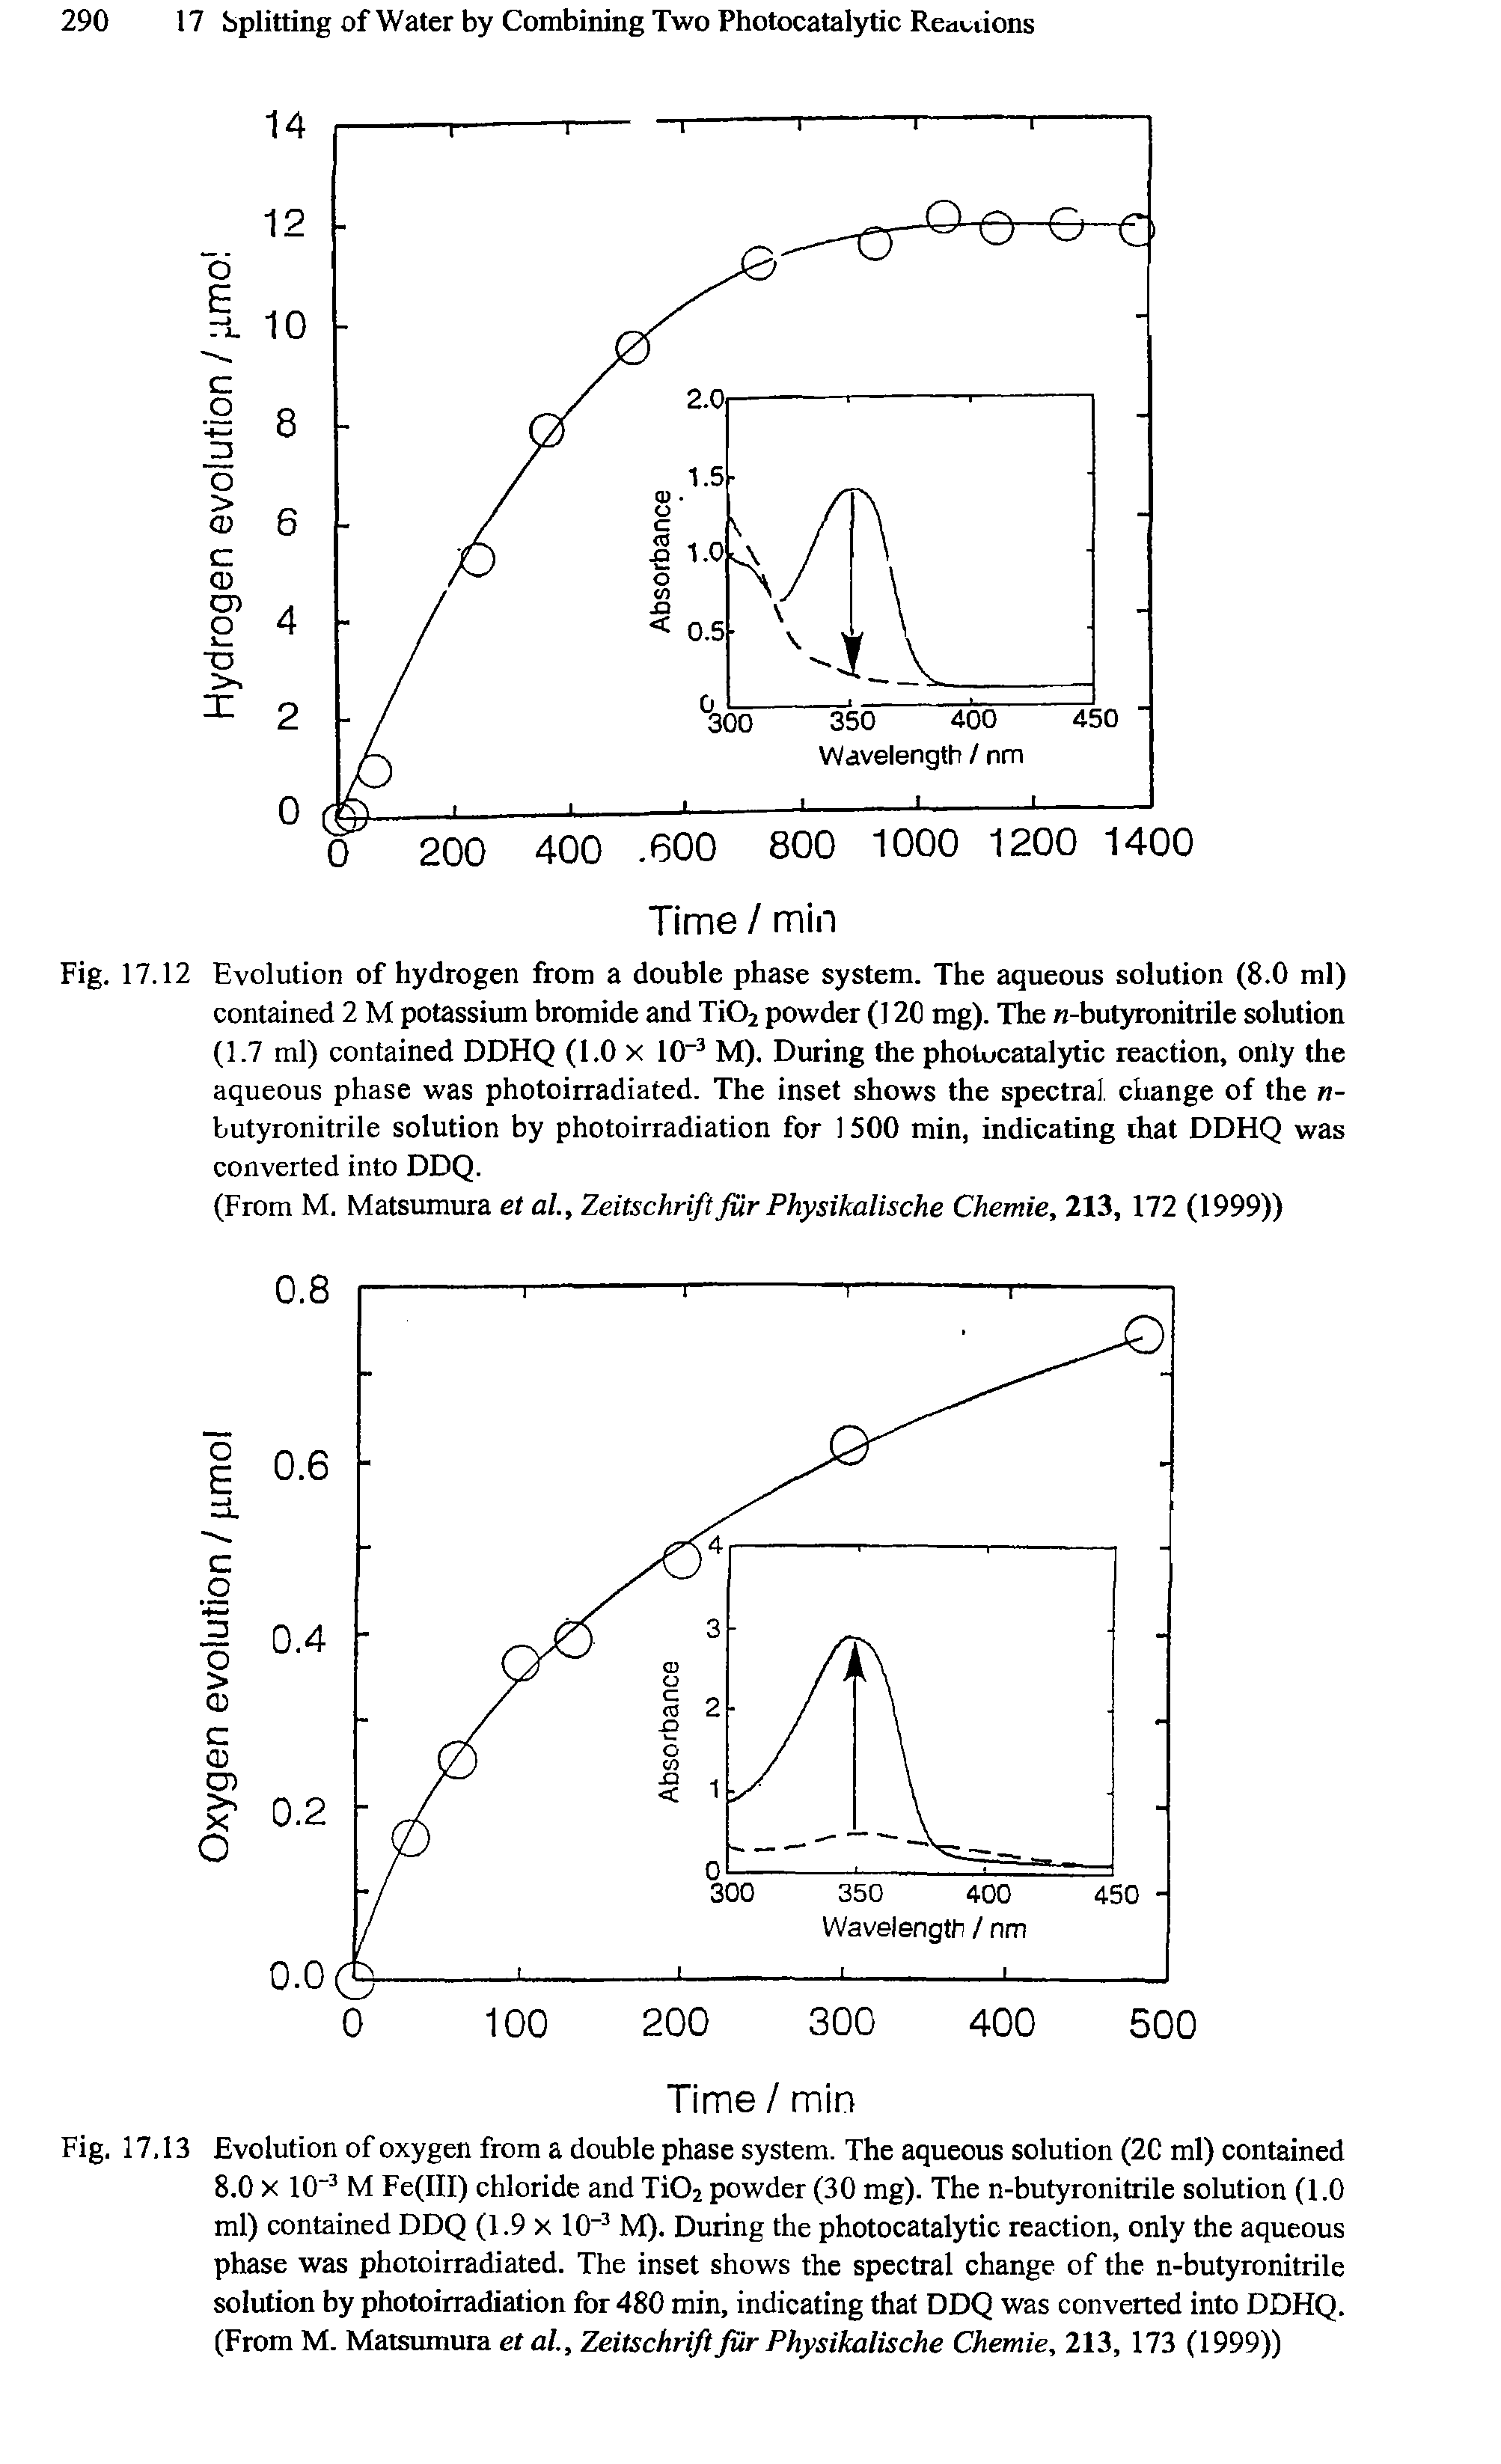 Fig. 17.12 Evolution of hydrogen from a double phase system. The aqueous solution (8.0 ml) contained 2 M potassium bromide and Ti02 powder (120 mg). The n-butyronitrile solution (1.7 ml) contained DDHQ (1.0 x 10-3 M). During the photocatalytic reaction, only the aqueous phase was photoirradiated. The inset shows the spectral change of the n-butyronitrile solution by photoirradiation for 1500 min, indicating that DDHQ was converted into DDQ.